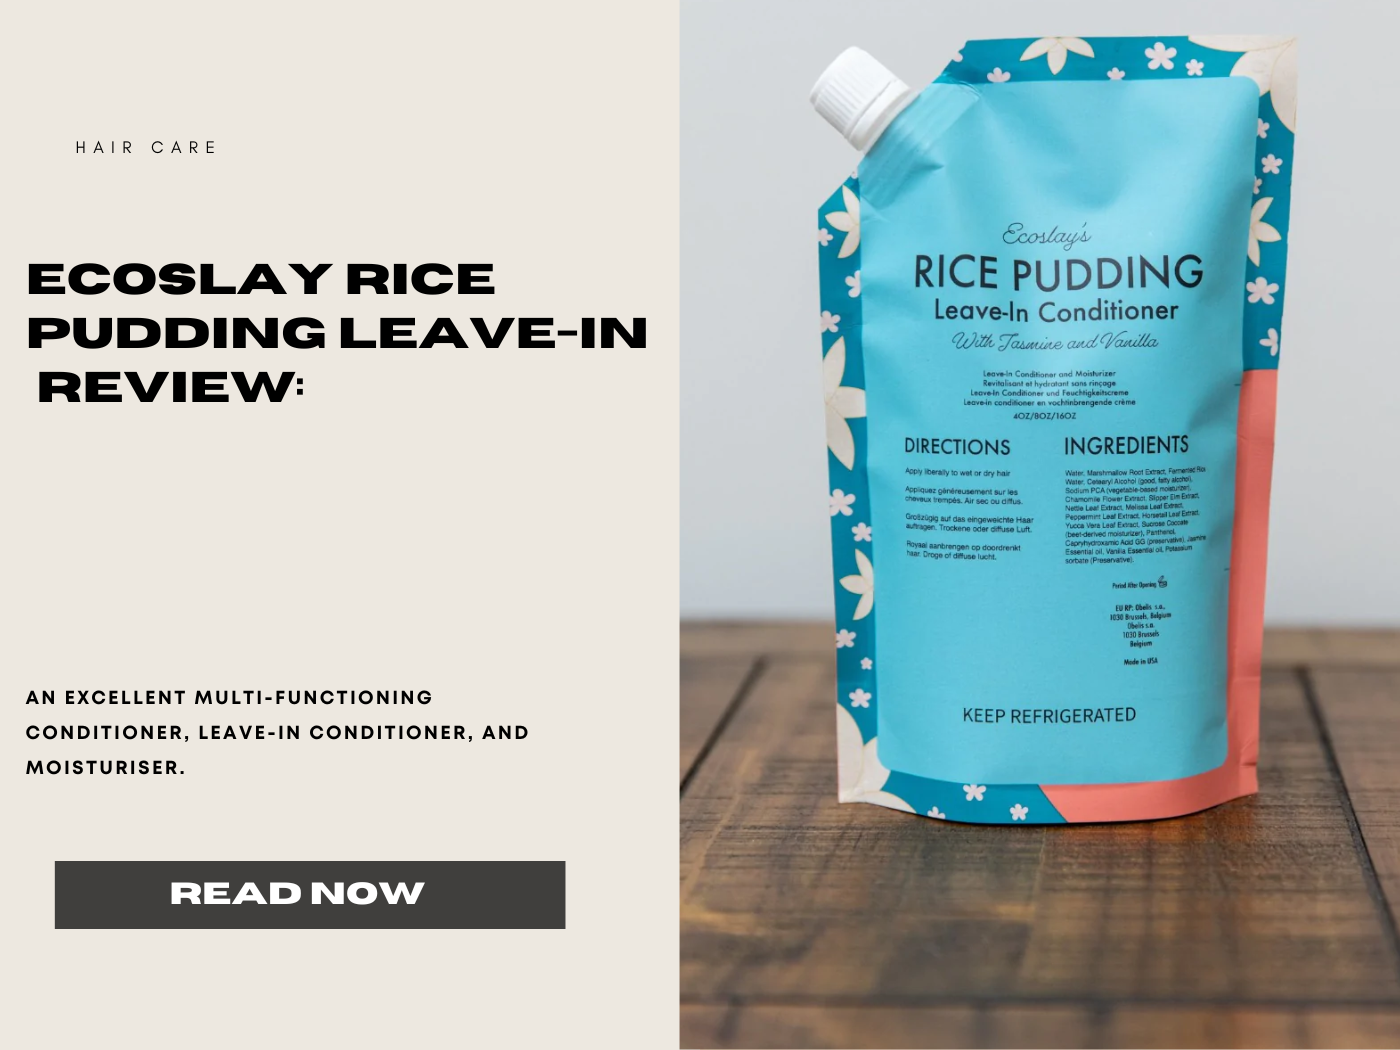 Ecoslay Rice Pudding Leave-In Conditioner and Moisturiser Review- AQ Online 